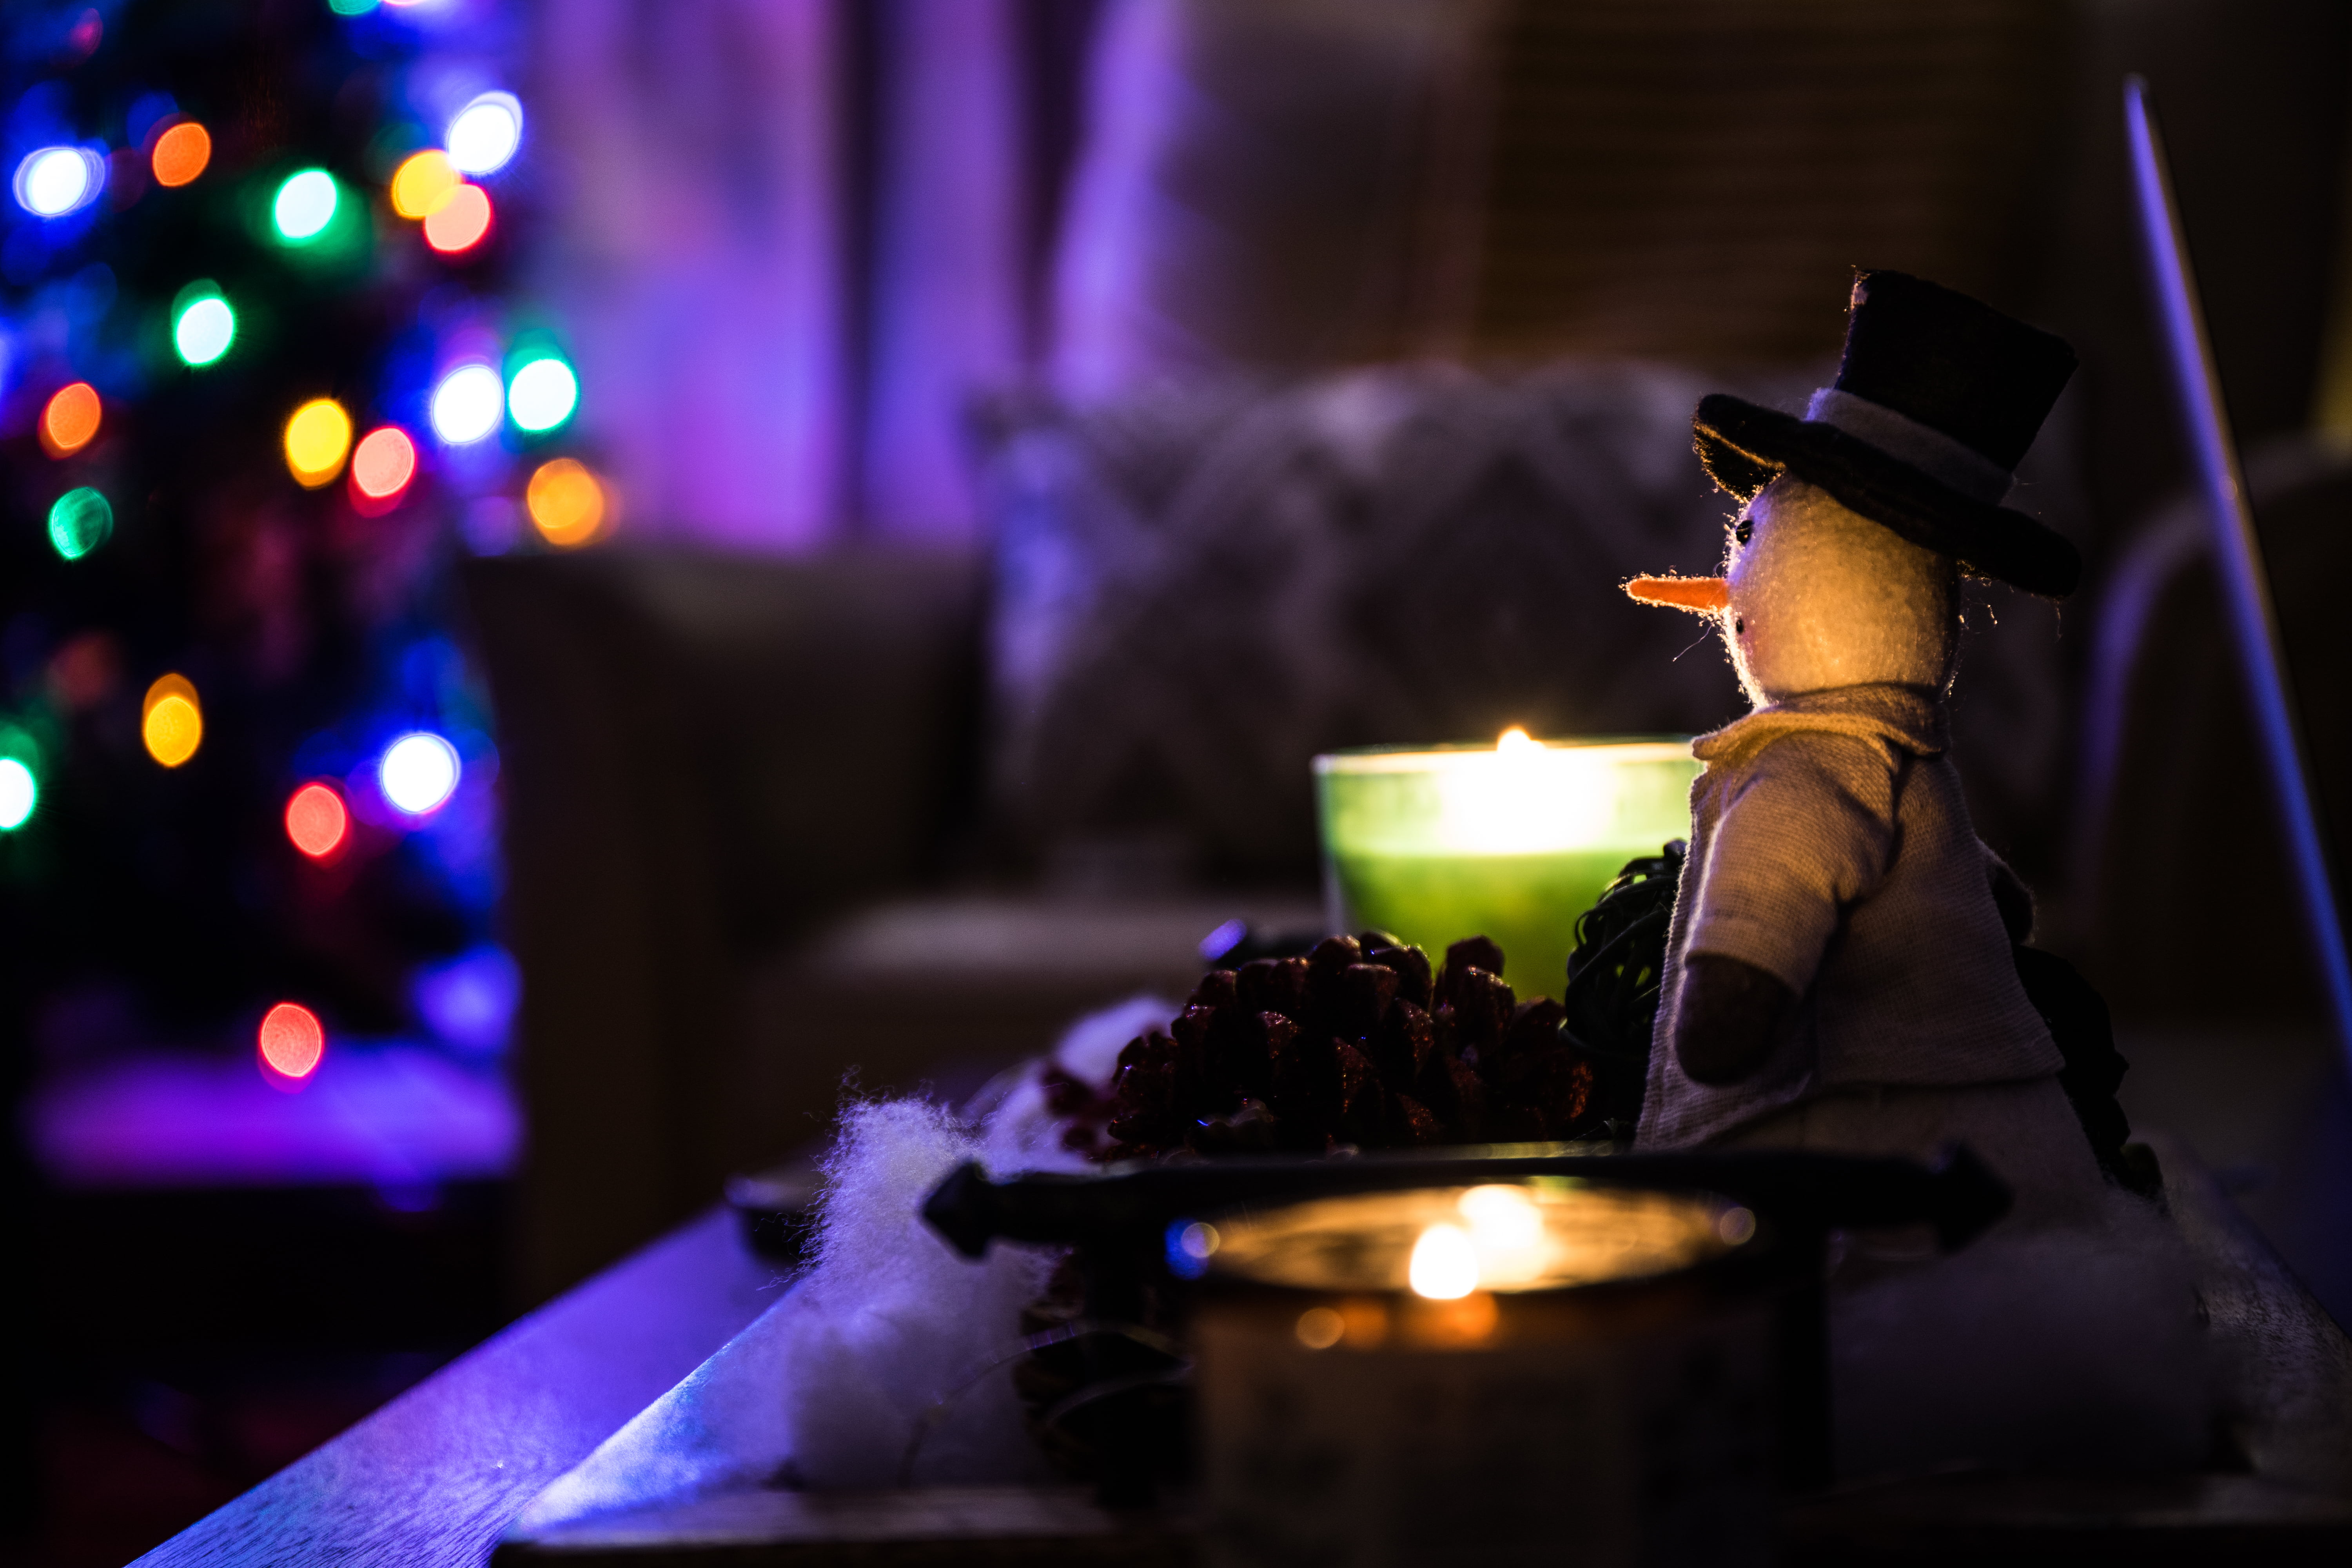 snowman plush toy beside candle